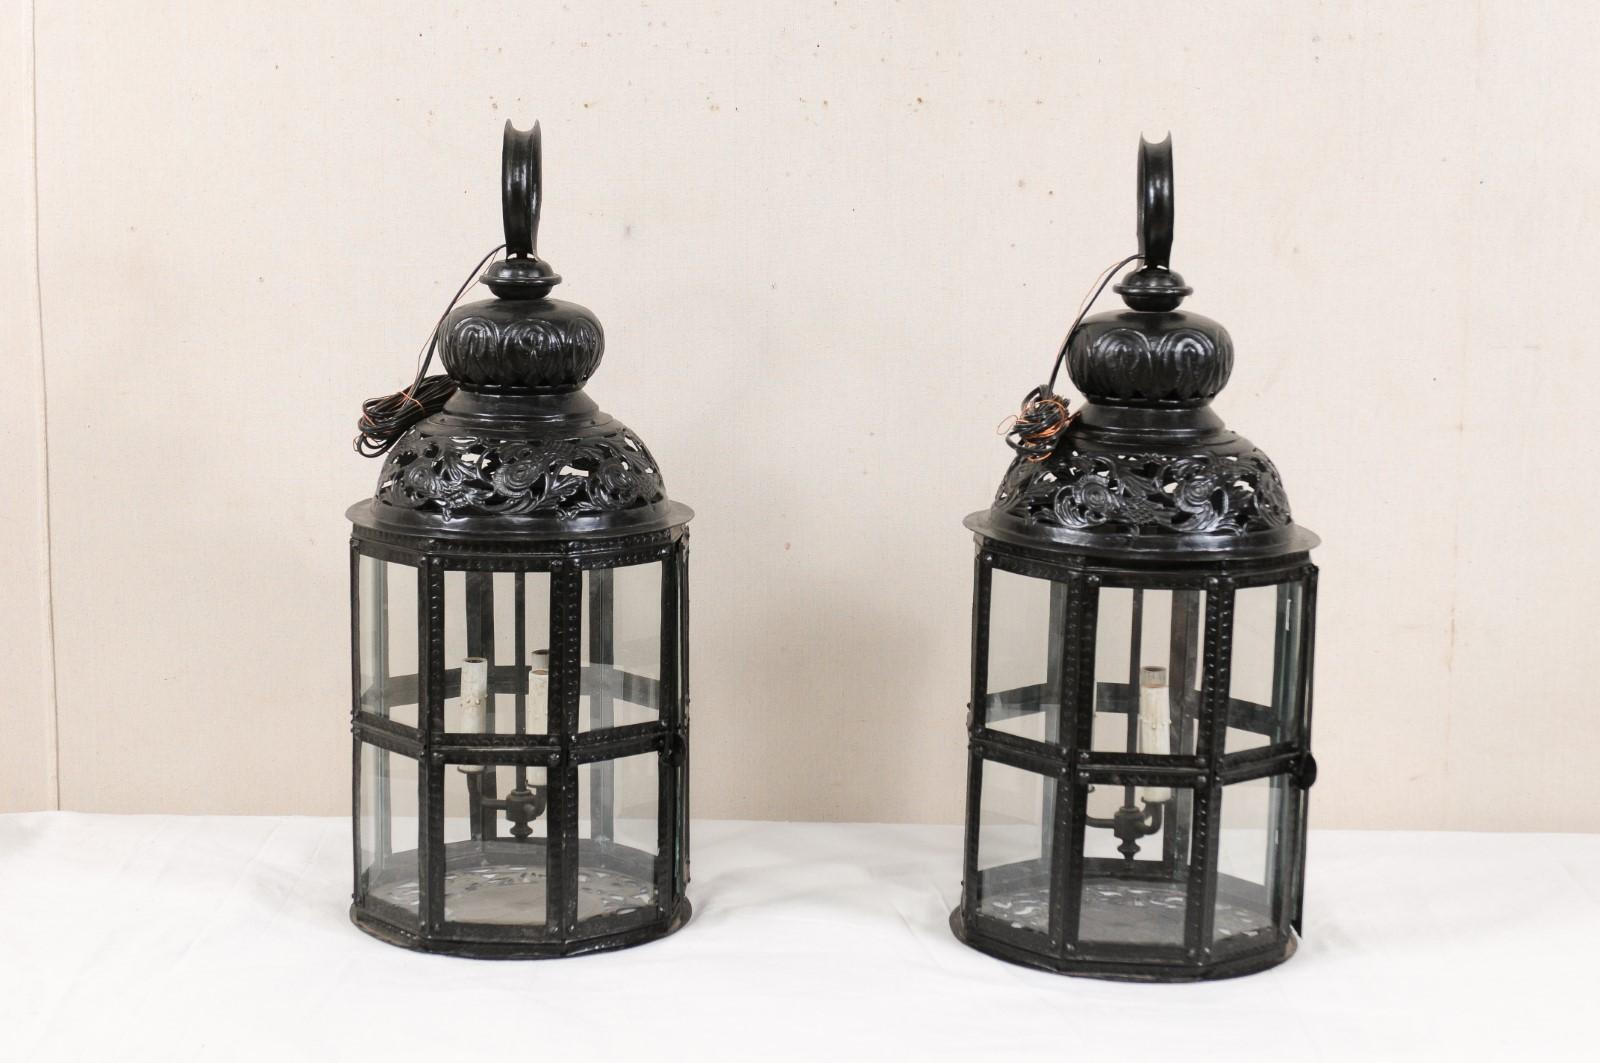 A pair of three-light black metal hanging Moroccan inspired lanterns. This pair of lanterns from Europe have an octagonal-shaped body, within a rounded top and bottom piece. The frame is black metal with glass set within the panels. There is a domed